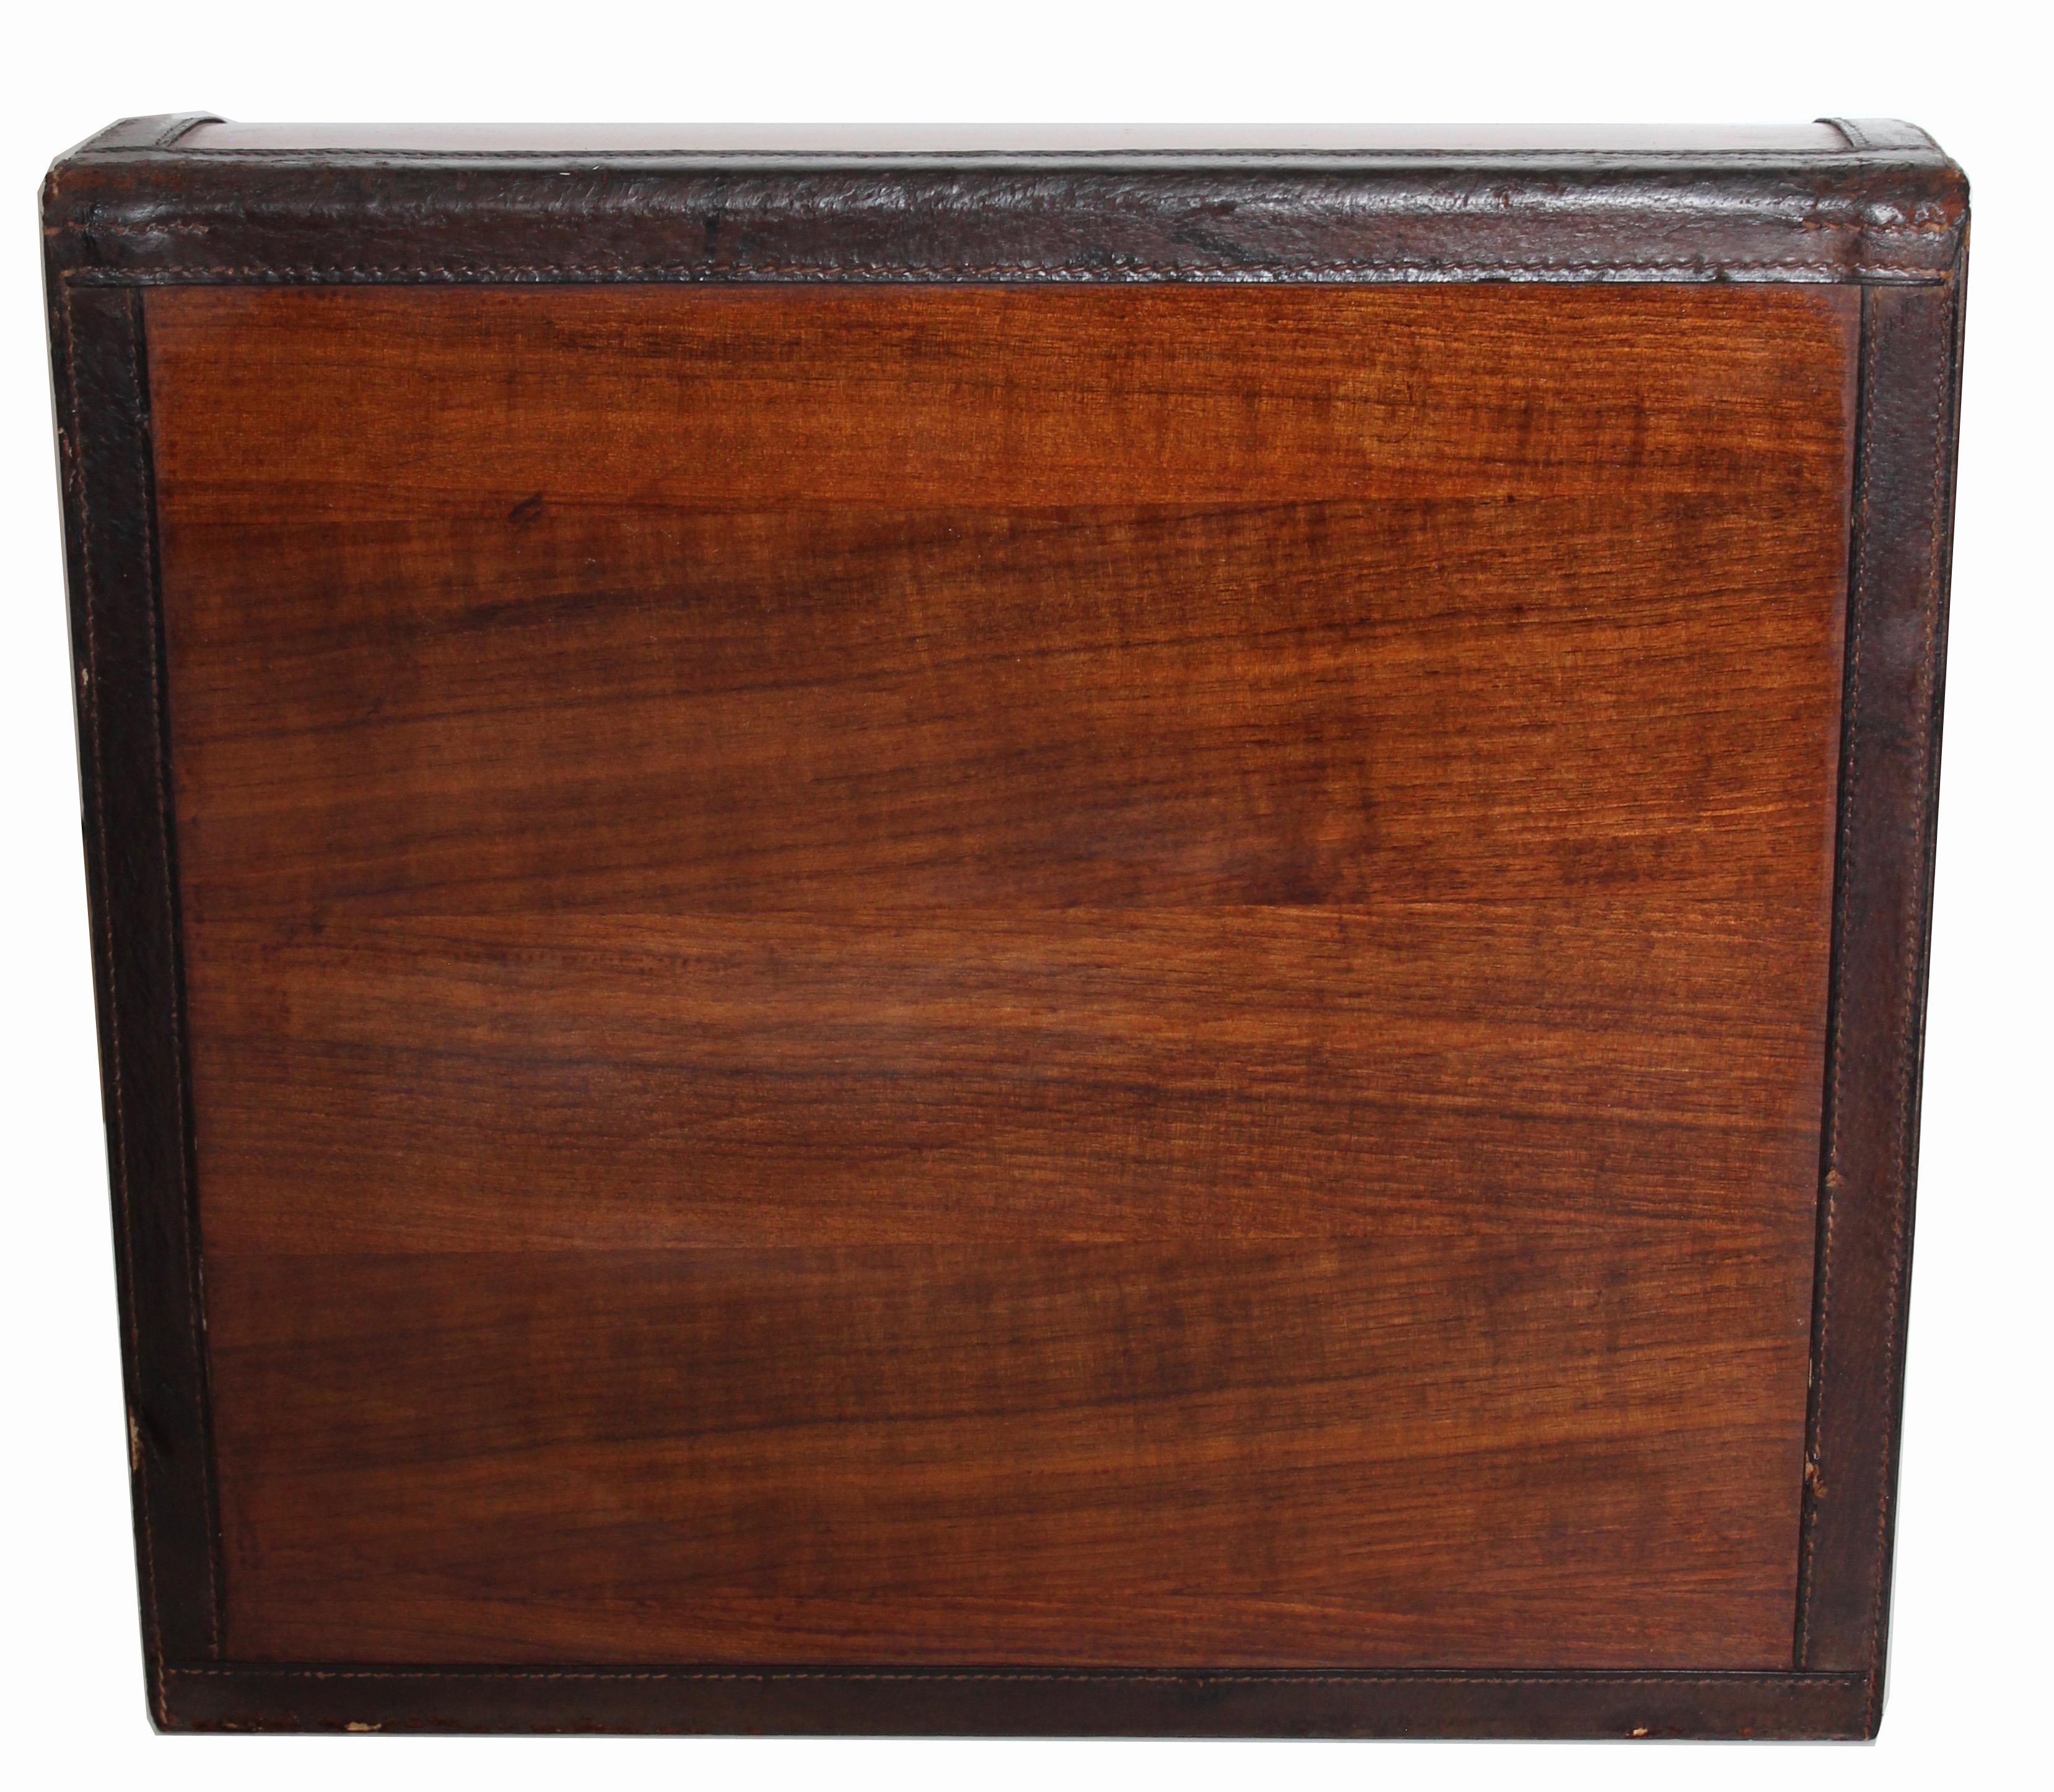 Gucci Tabletop Bar Home Decor Rosewood Leather Trim Mid Century Barware 60s Rare For Sale 3